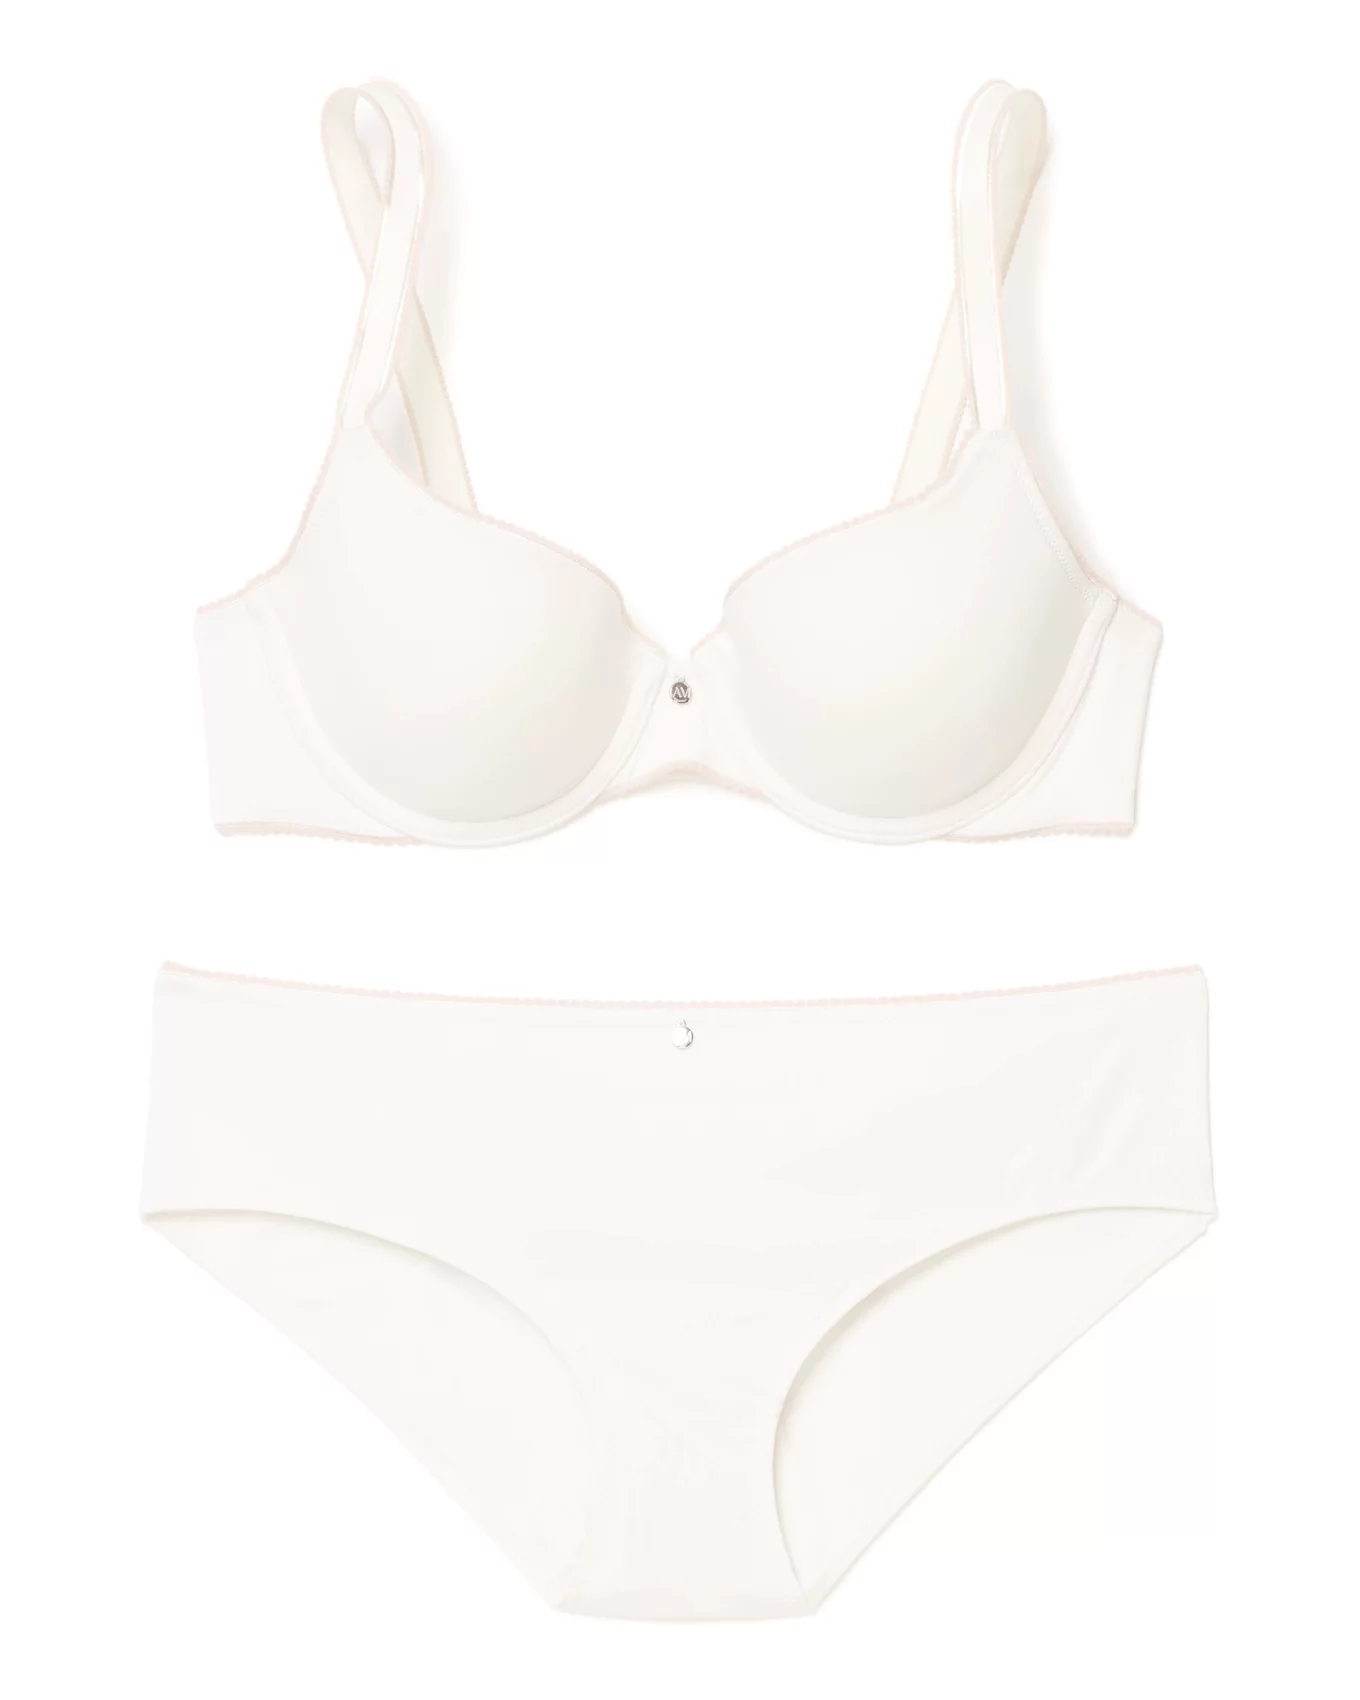 Buy online White Cotton Blend Regular Bra from lingerie for Women by Madam  for ₹329 at 26% off